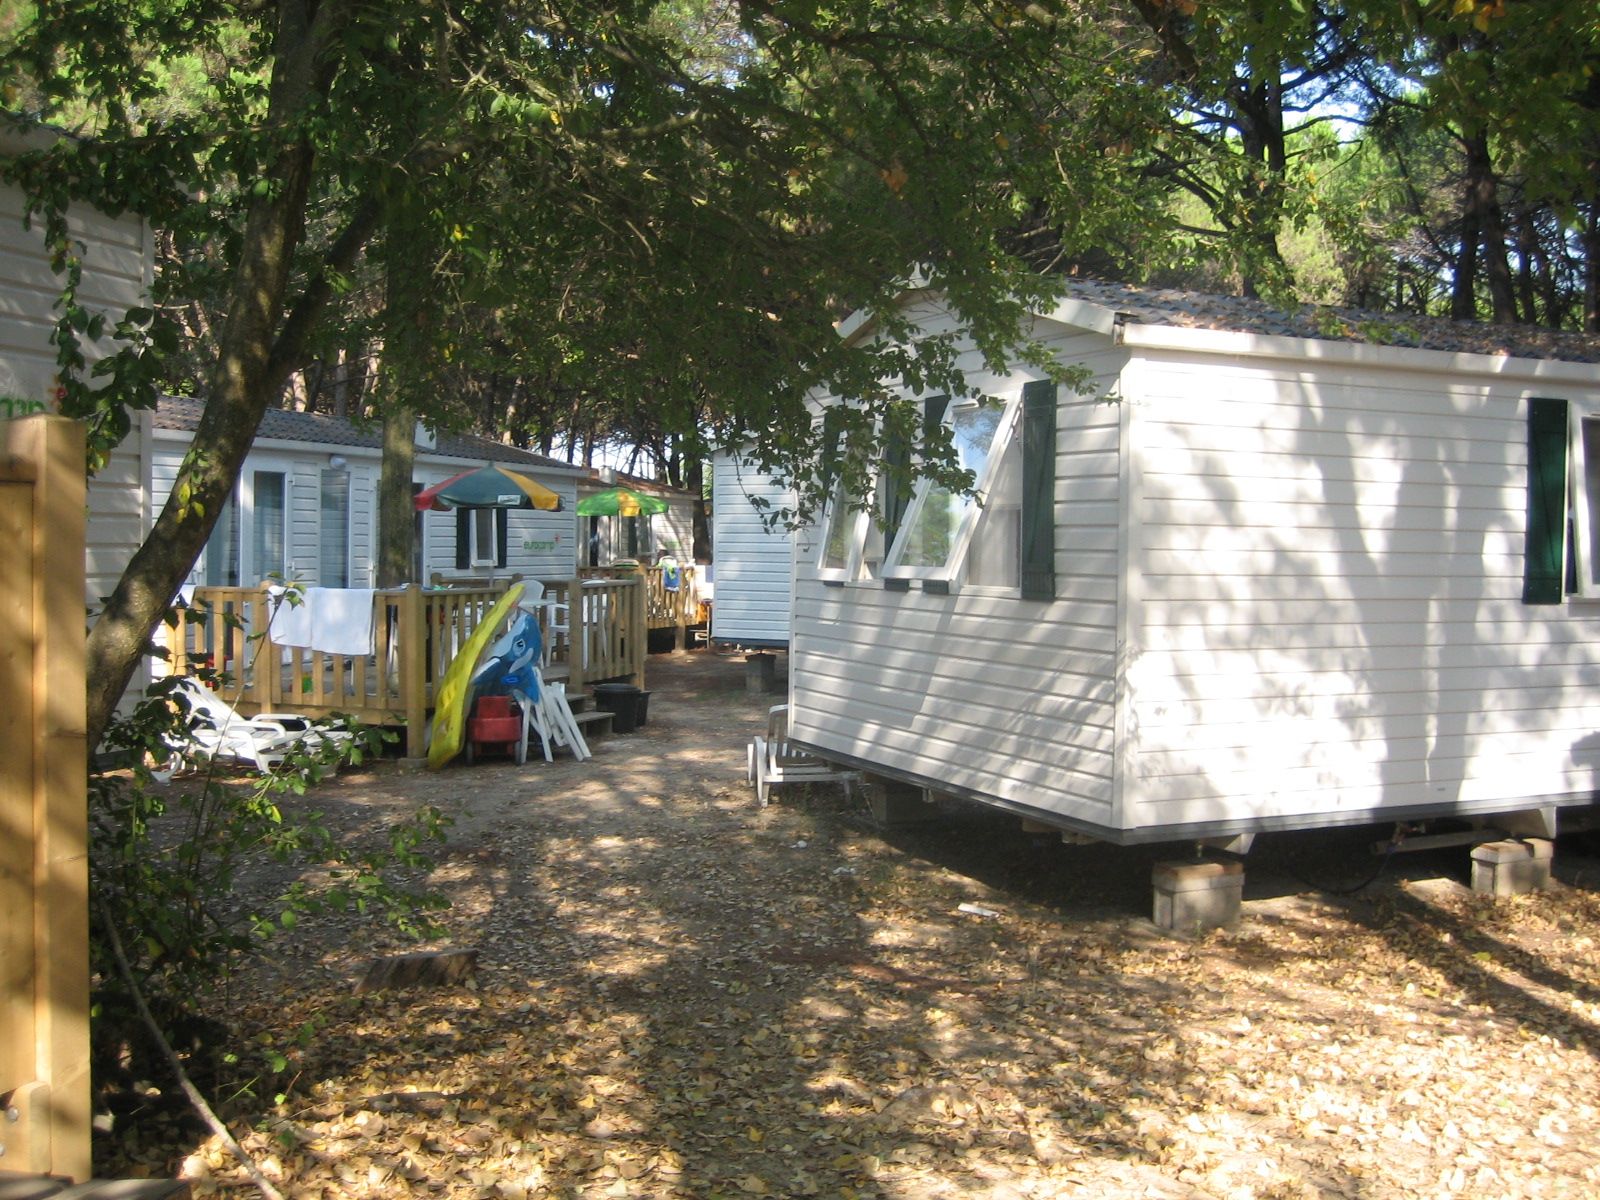 Our caravan under the trees